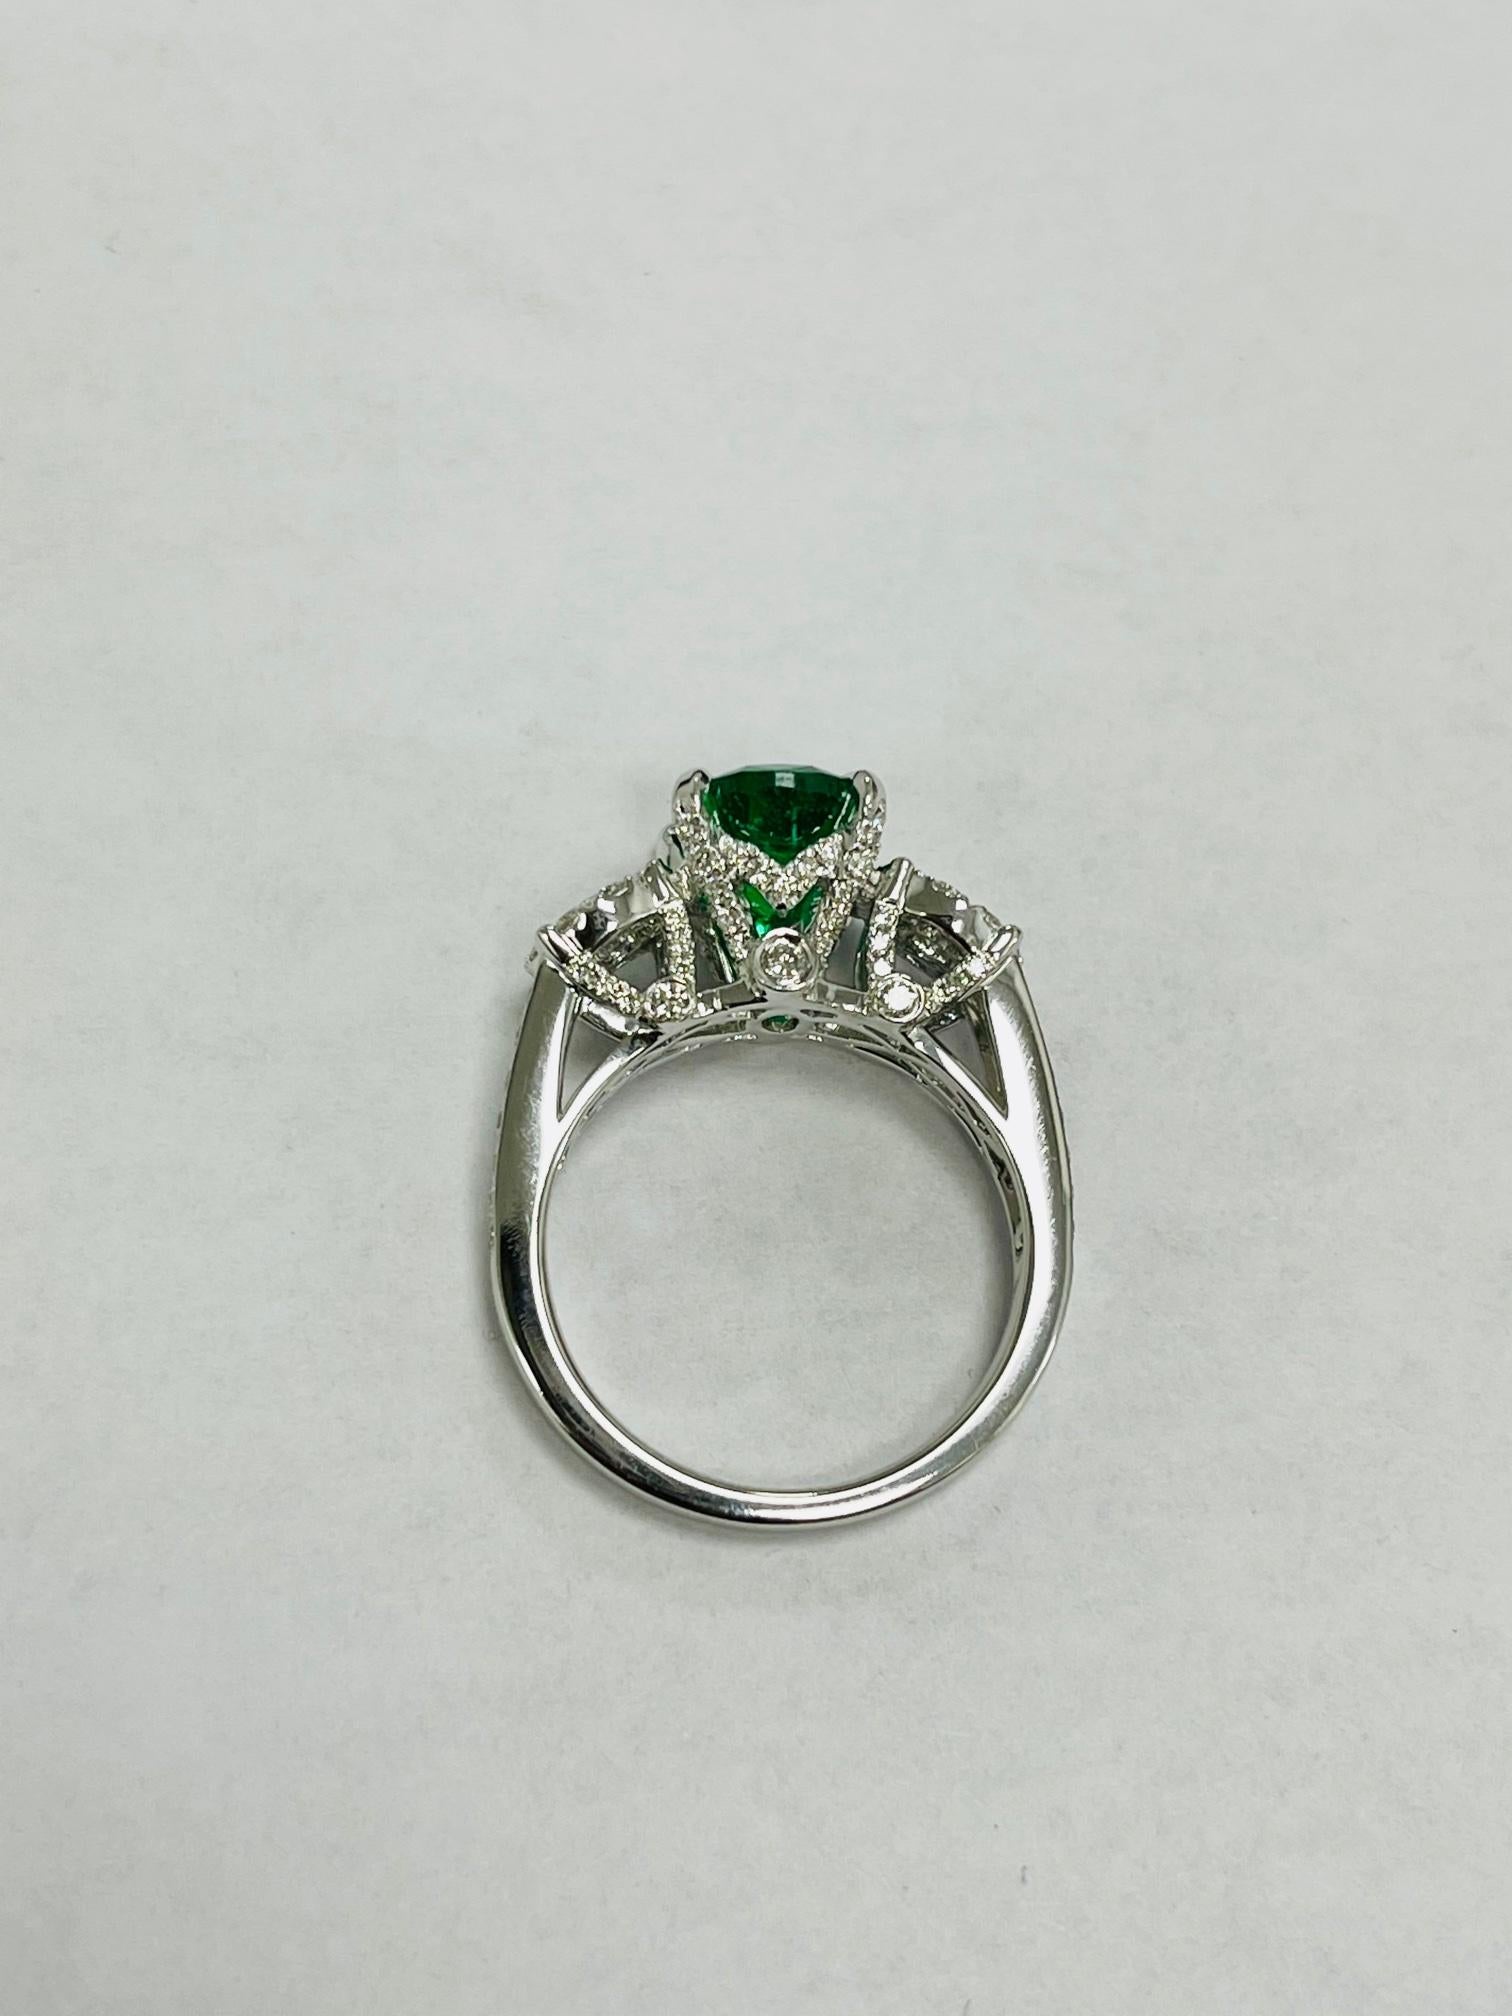 Oval Cut 1.85 Carat Zambian Emerald Diamond Cocktail Ring For Sale